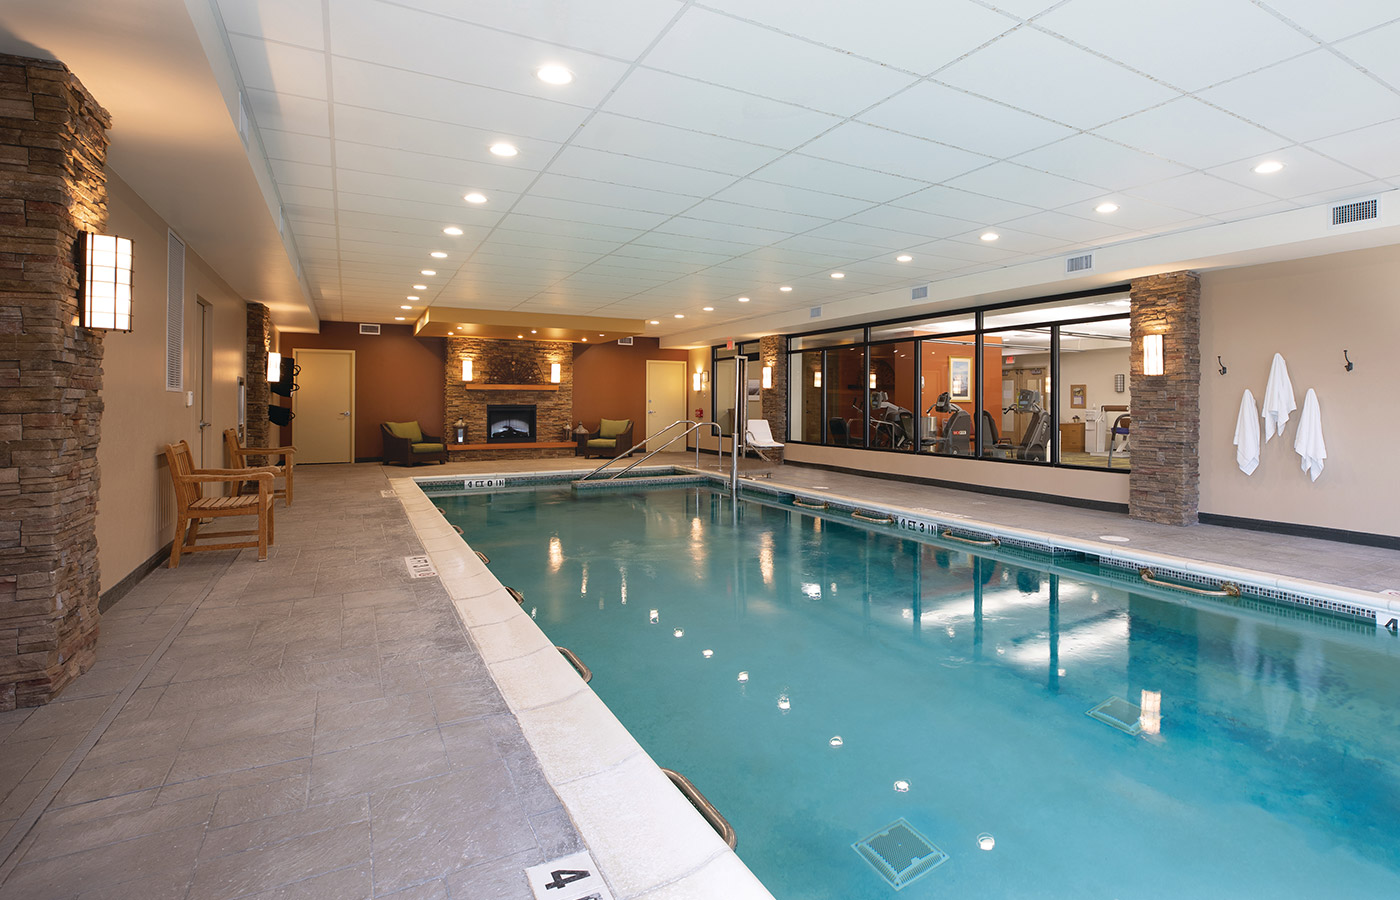 The indoor pool at The Watermark at East Hill.